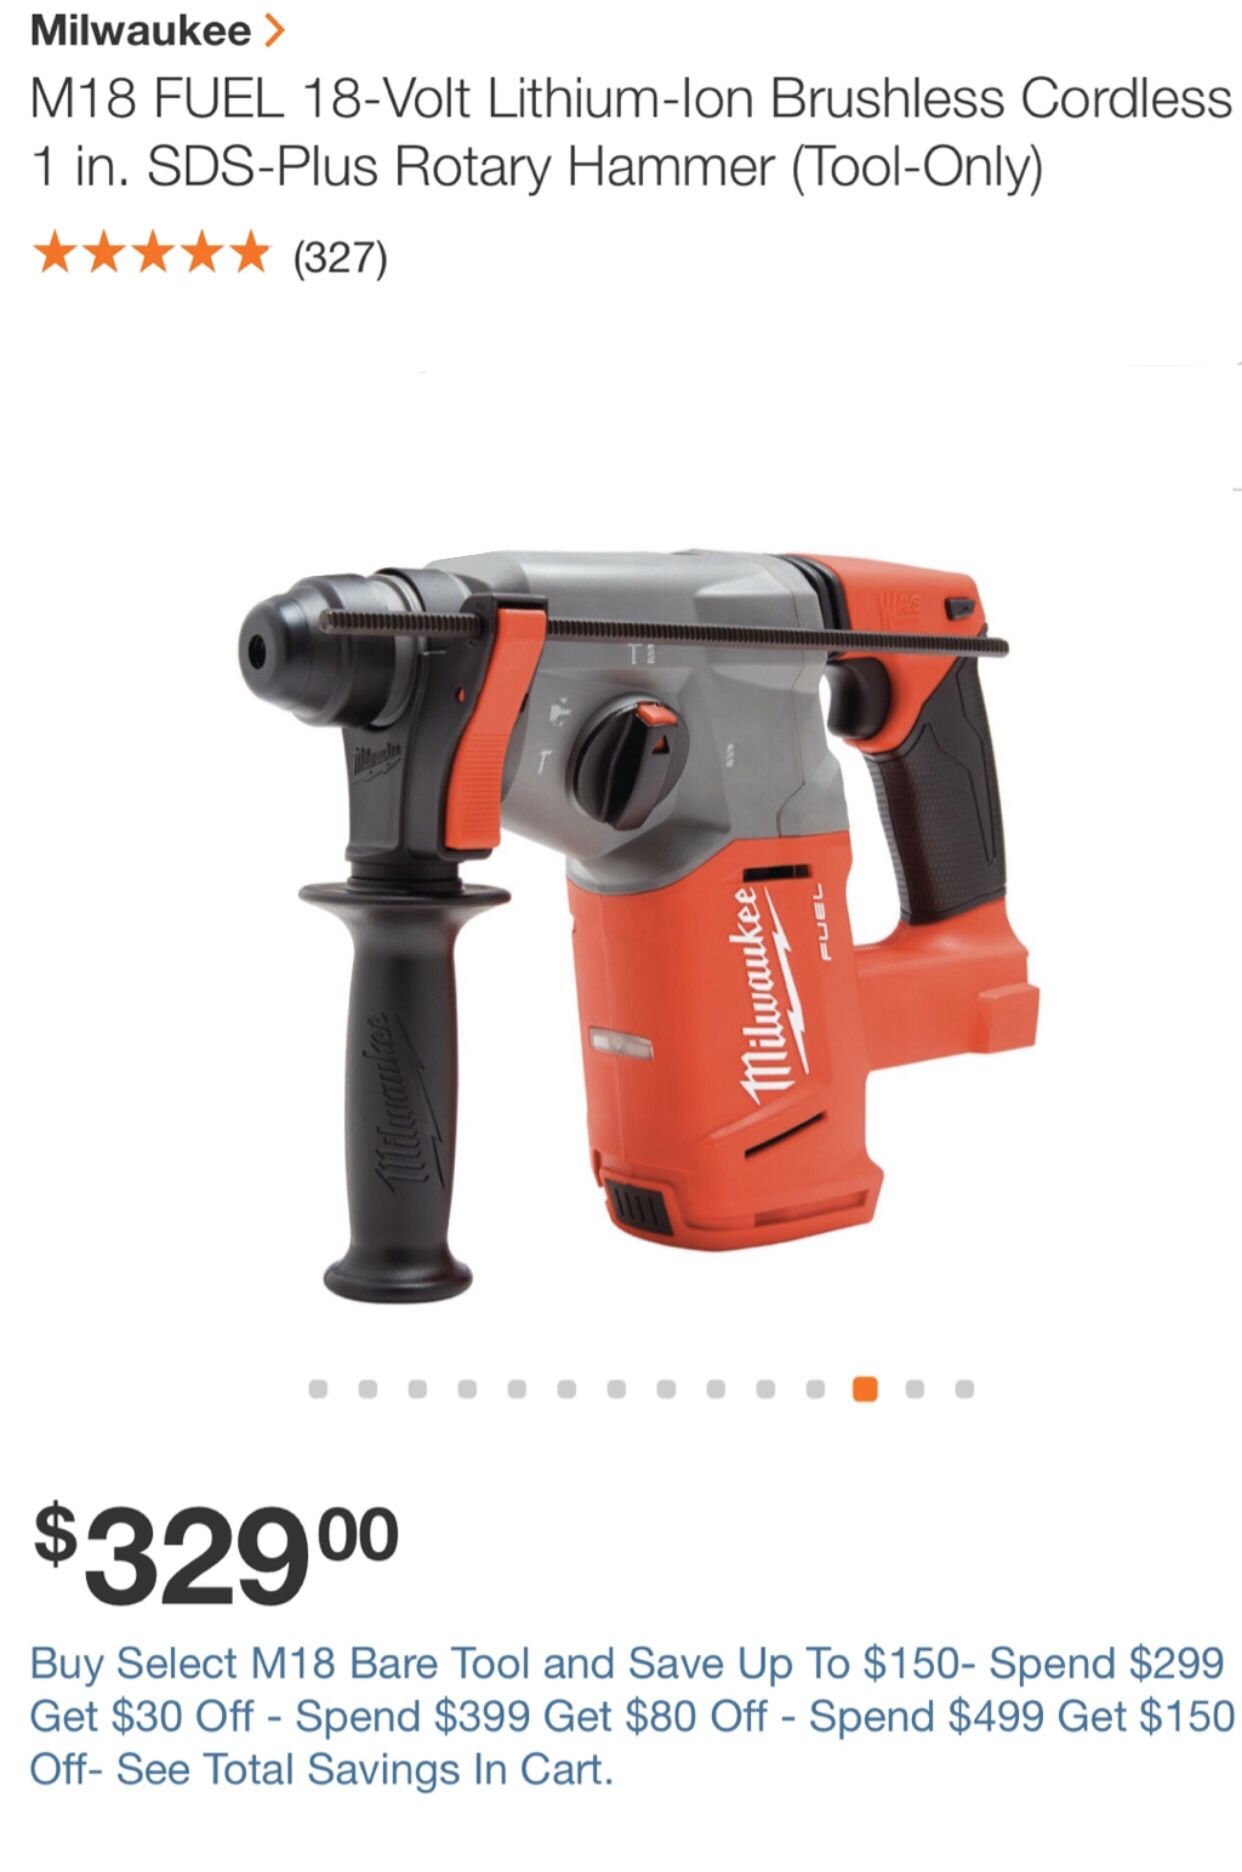 Drill(STEAL !!!BRAND NEW)!!M18 FUEL 18-Volt Lithium-Ion Brushless Cordless 1 in. SDS-Plus Rotary Hammer (Tool-Only)